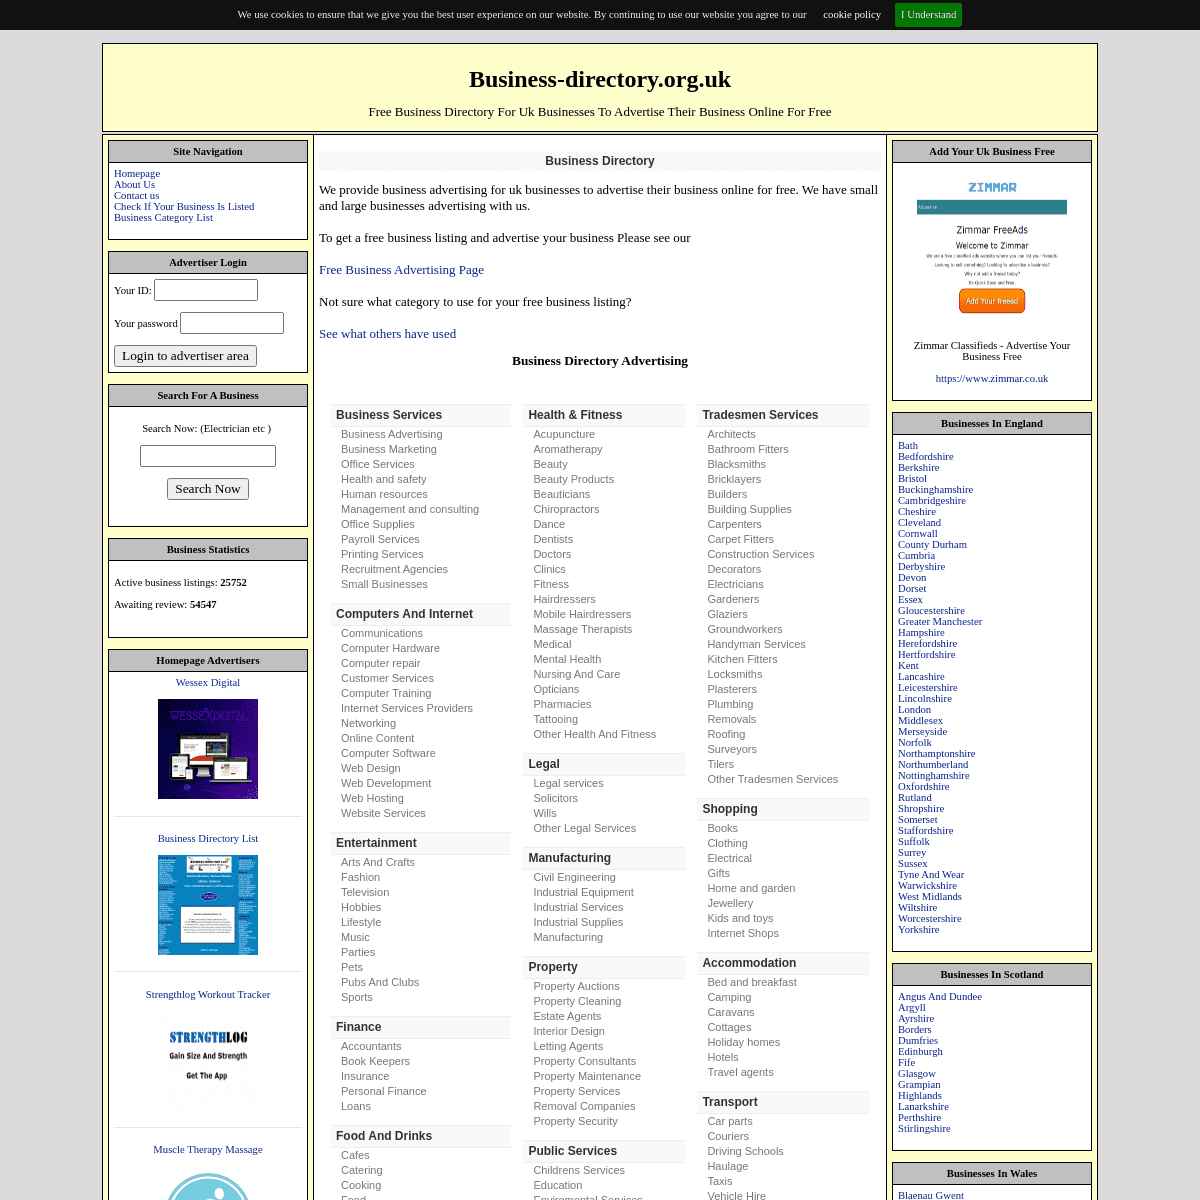 A complete backup of https://business-directory.org.uk